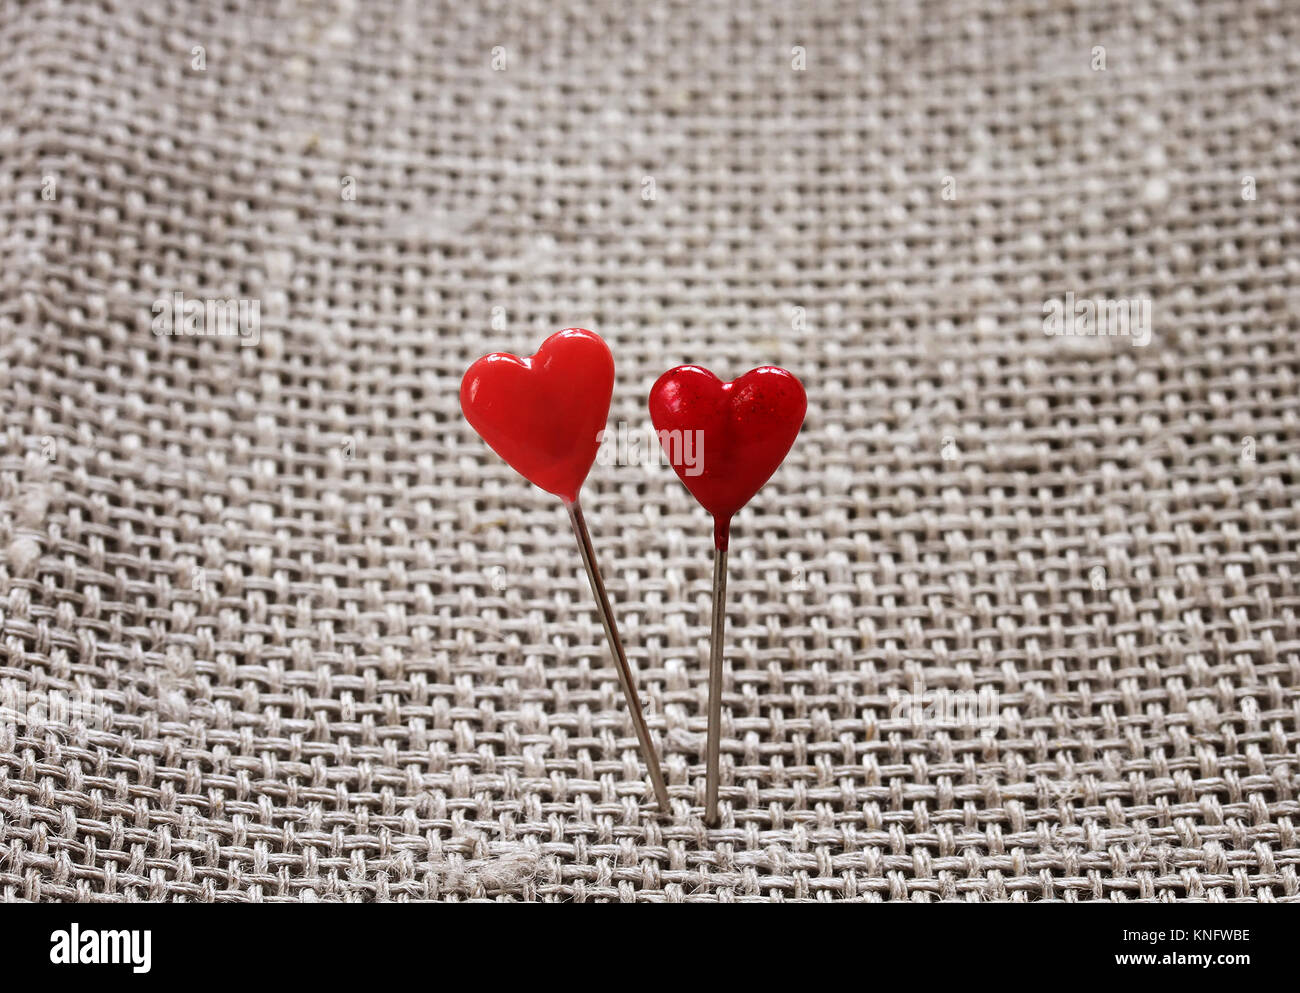 a pair of sharp pins in the form of red hearts stuck in the rough burlap Stock Photo